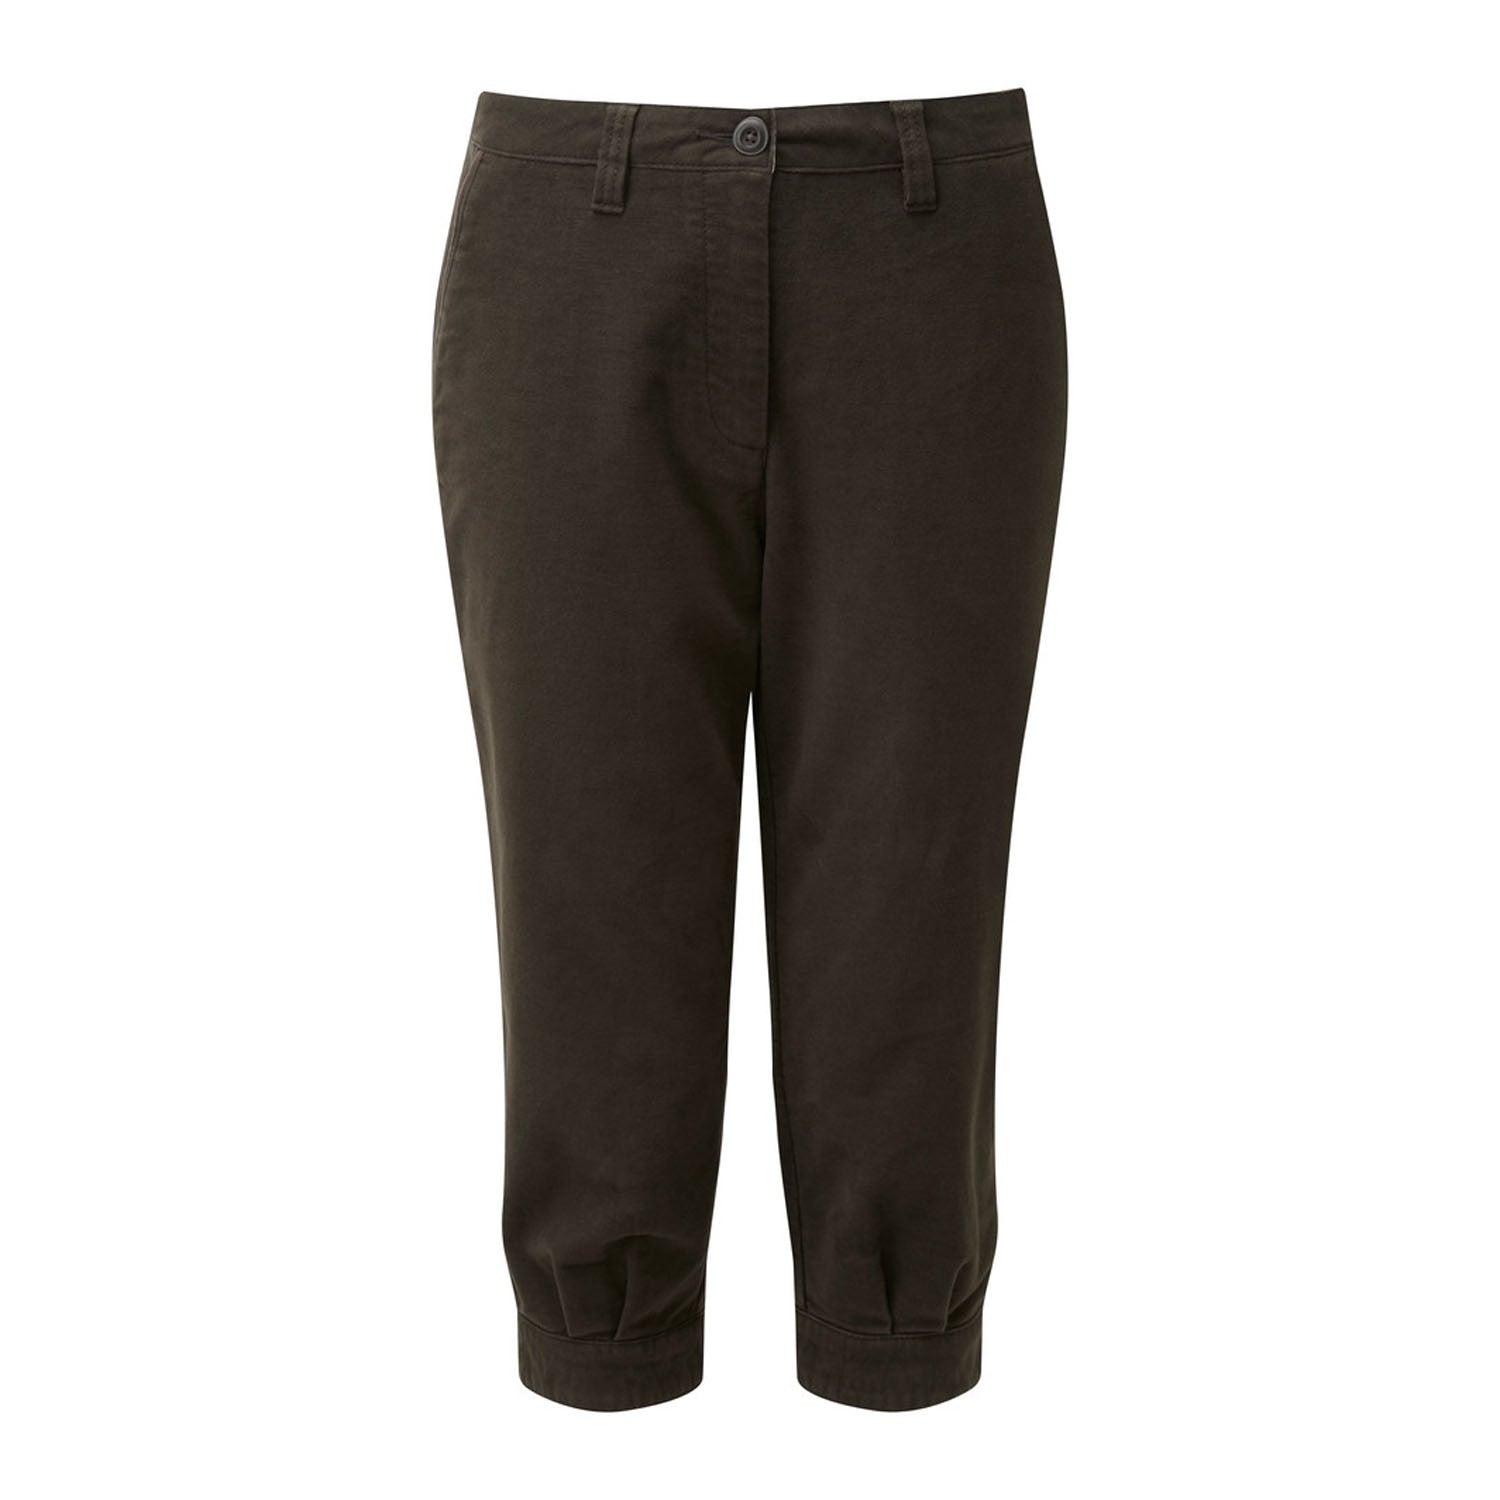 Hoggs of Fife Mens Monarch Moleskin Trousers from 4079